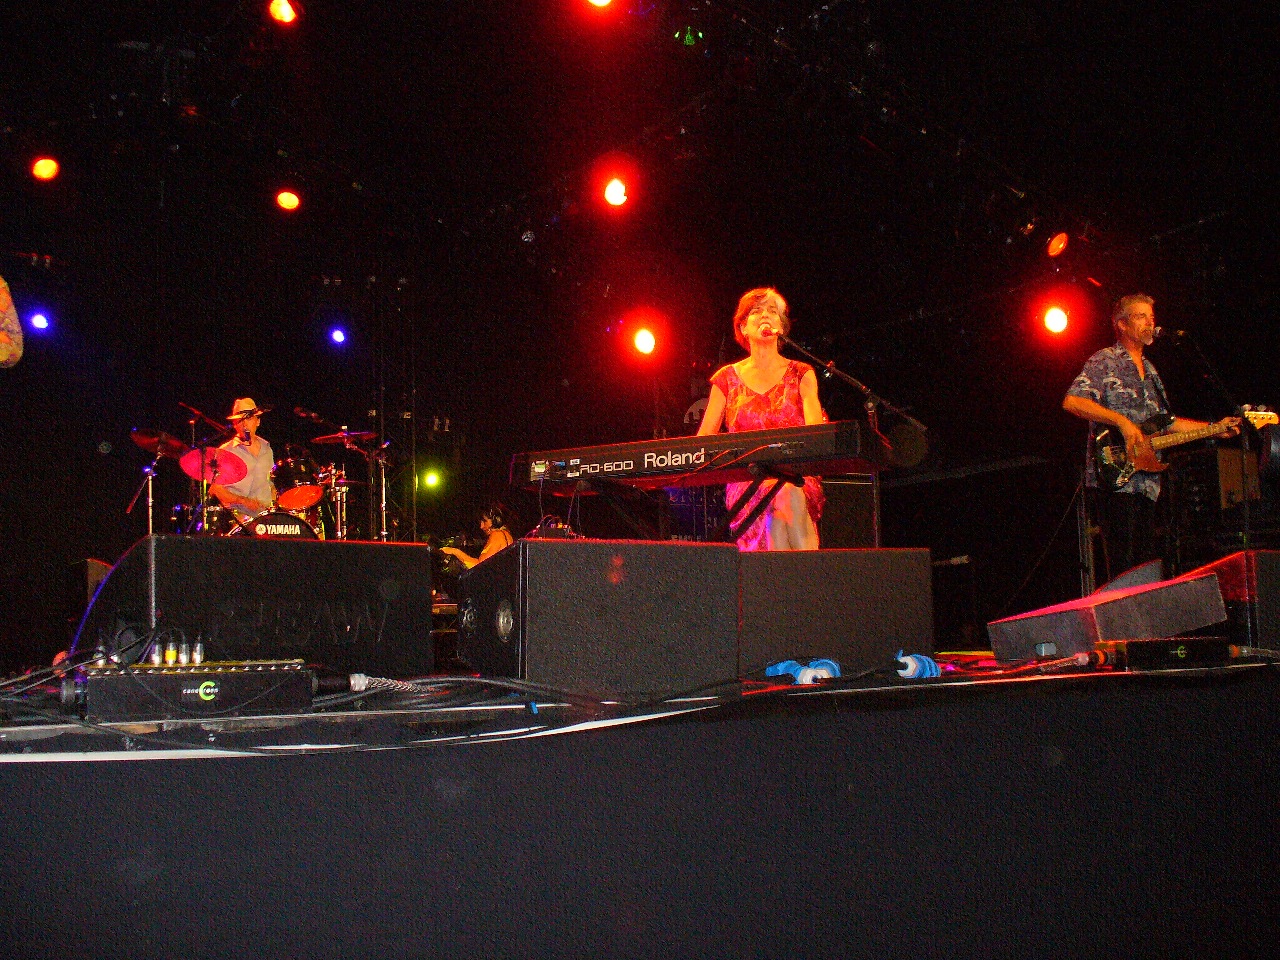 three people playing on keyboards and piano in front of colorful lighting